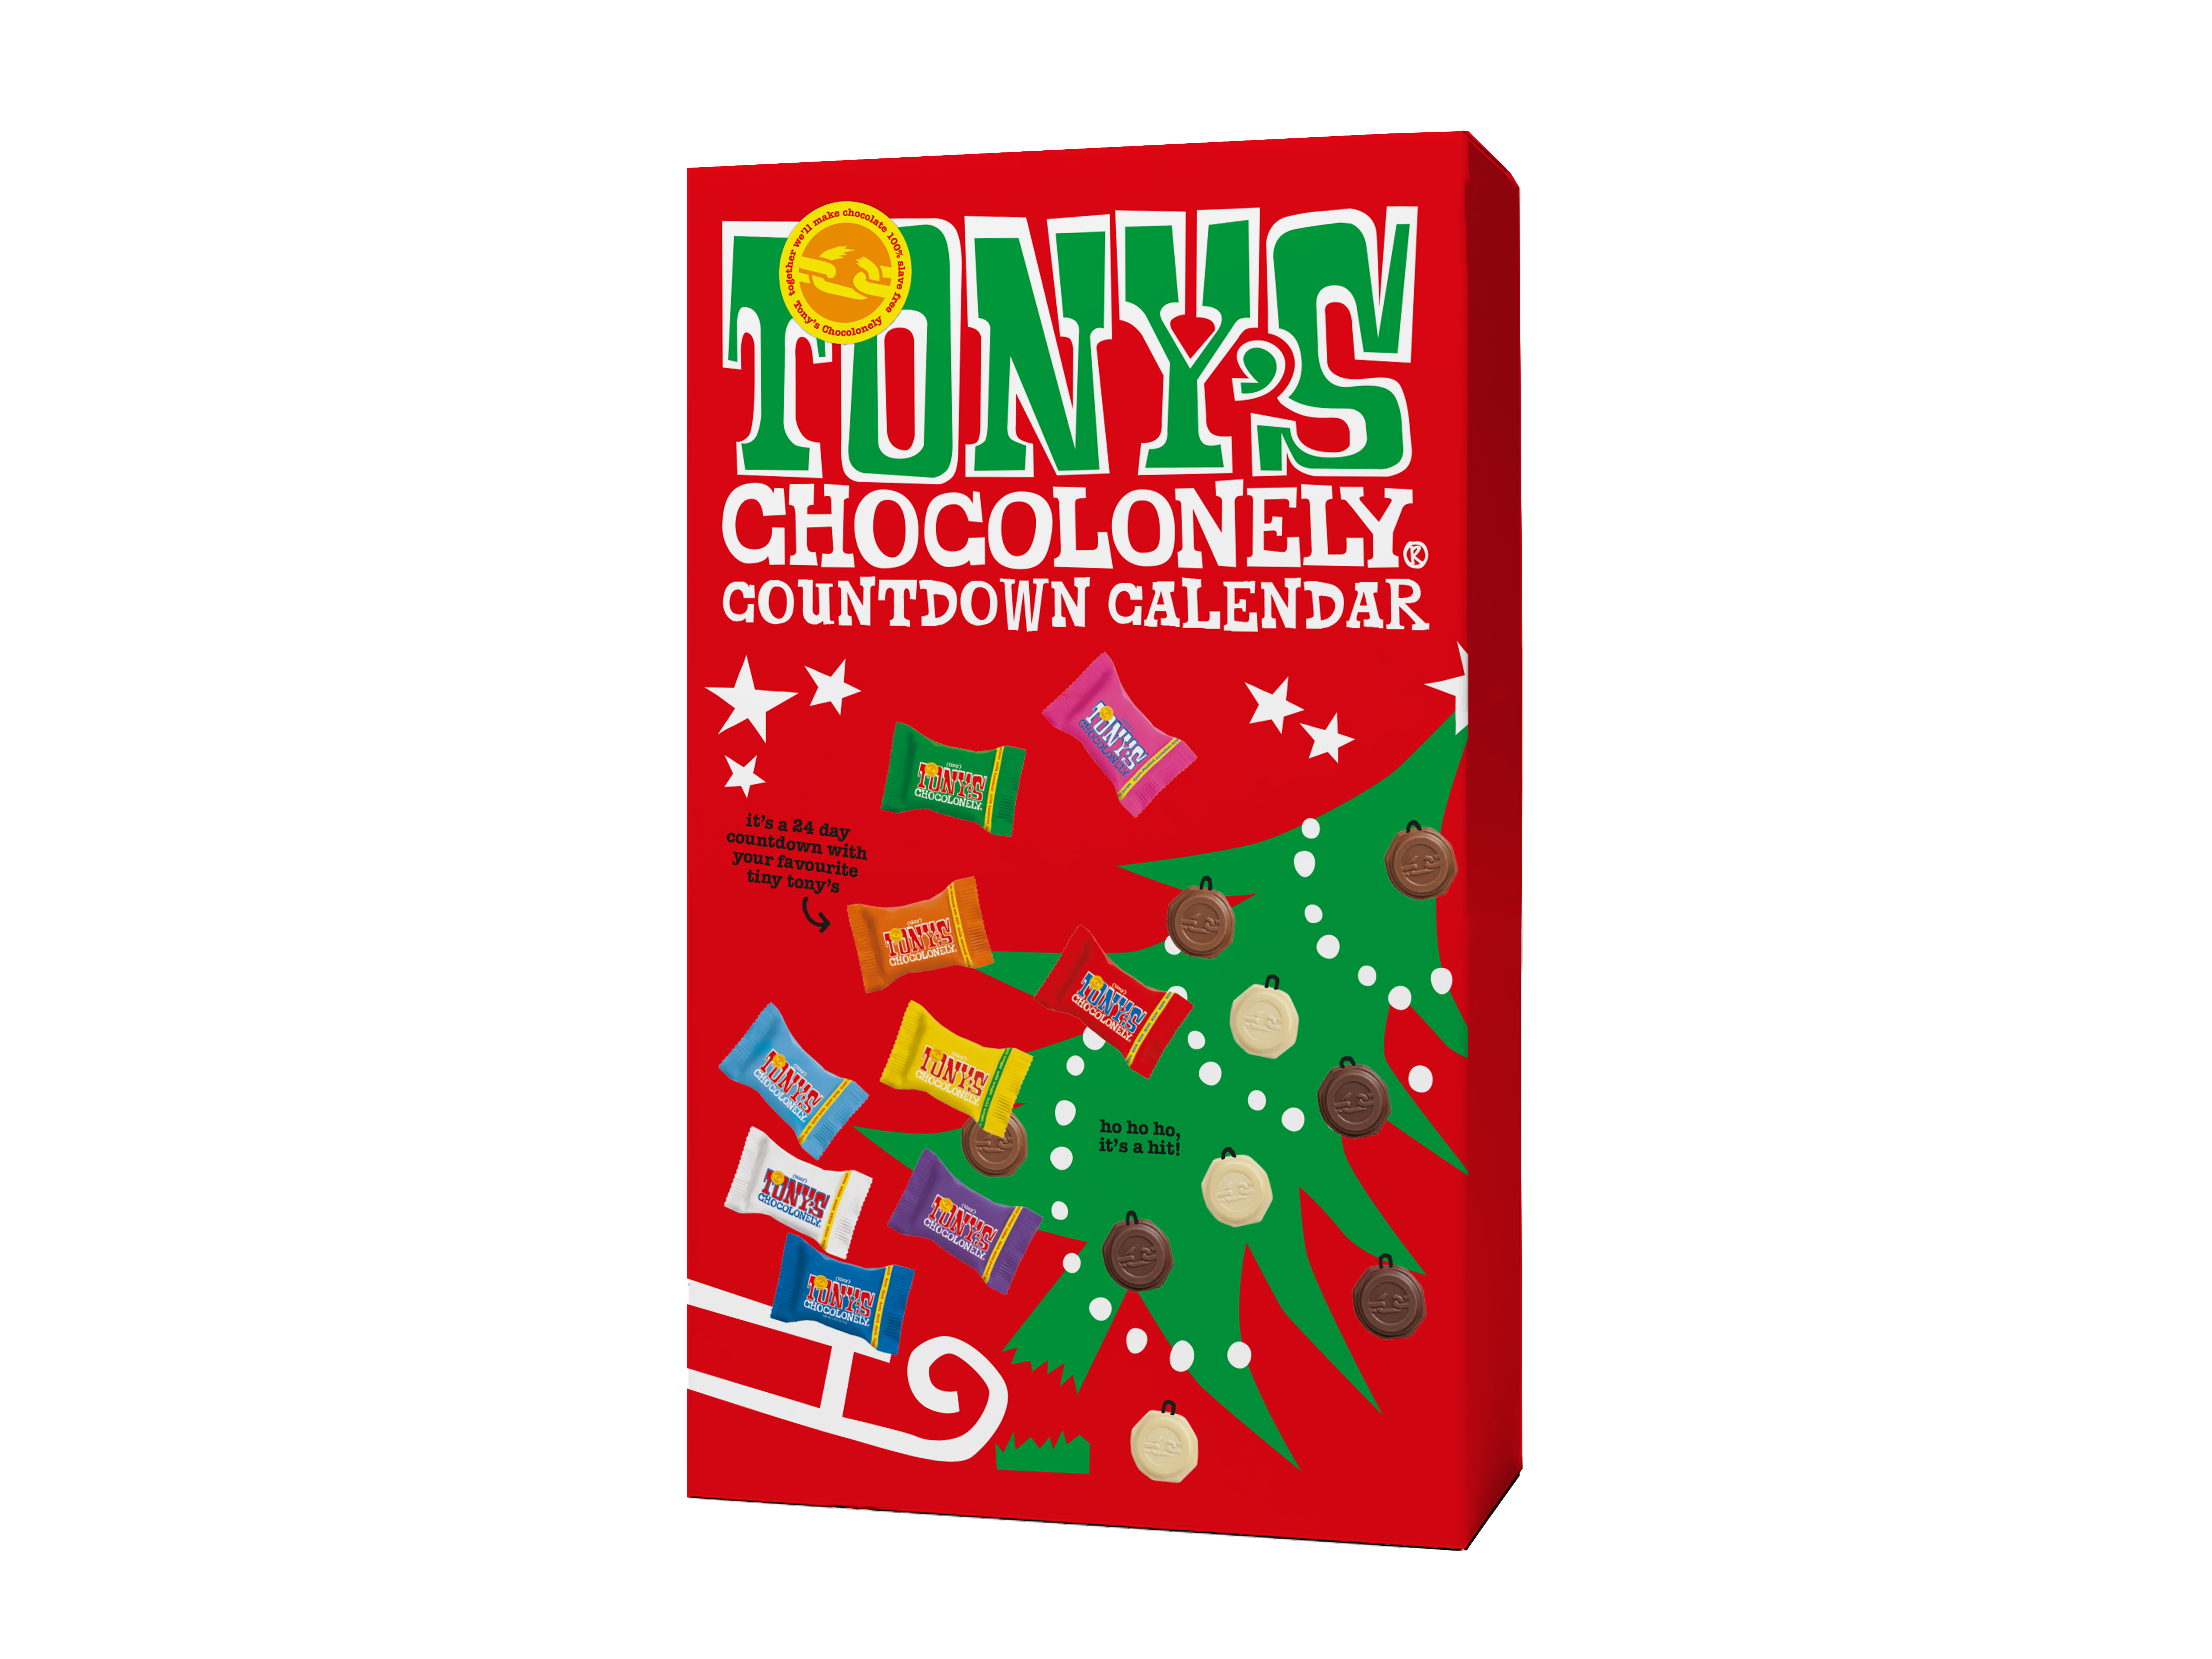 Tonys Chocolonely Countdown Calendar.png